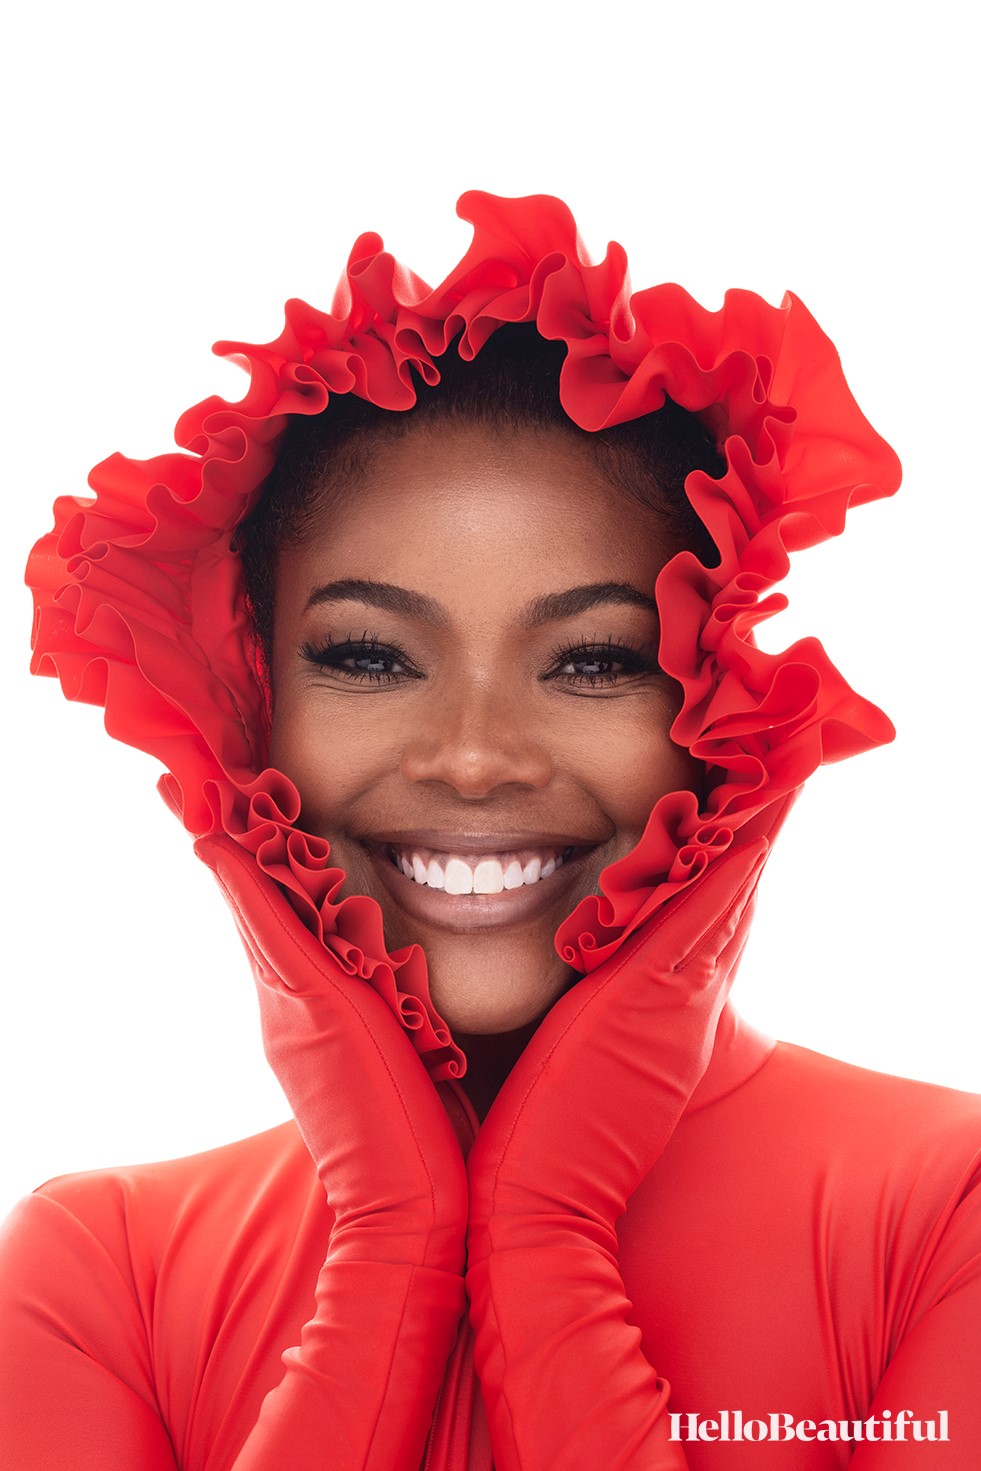 Gabrielle Union Talks Work, Life, Love And Relationship On Newest Cover Of Hellobeautiful, Yours Truly, News, June 7, 2023